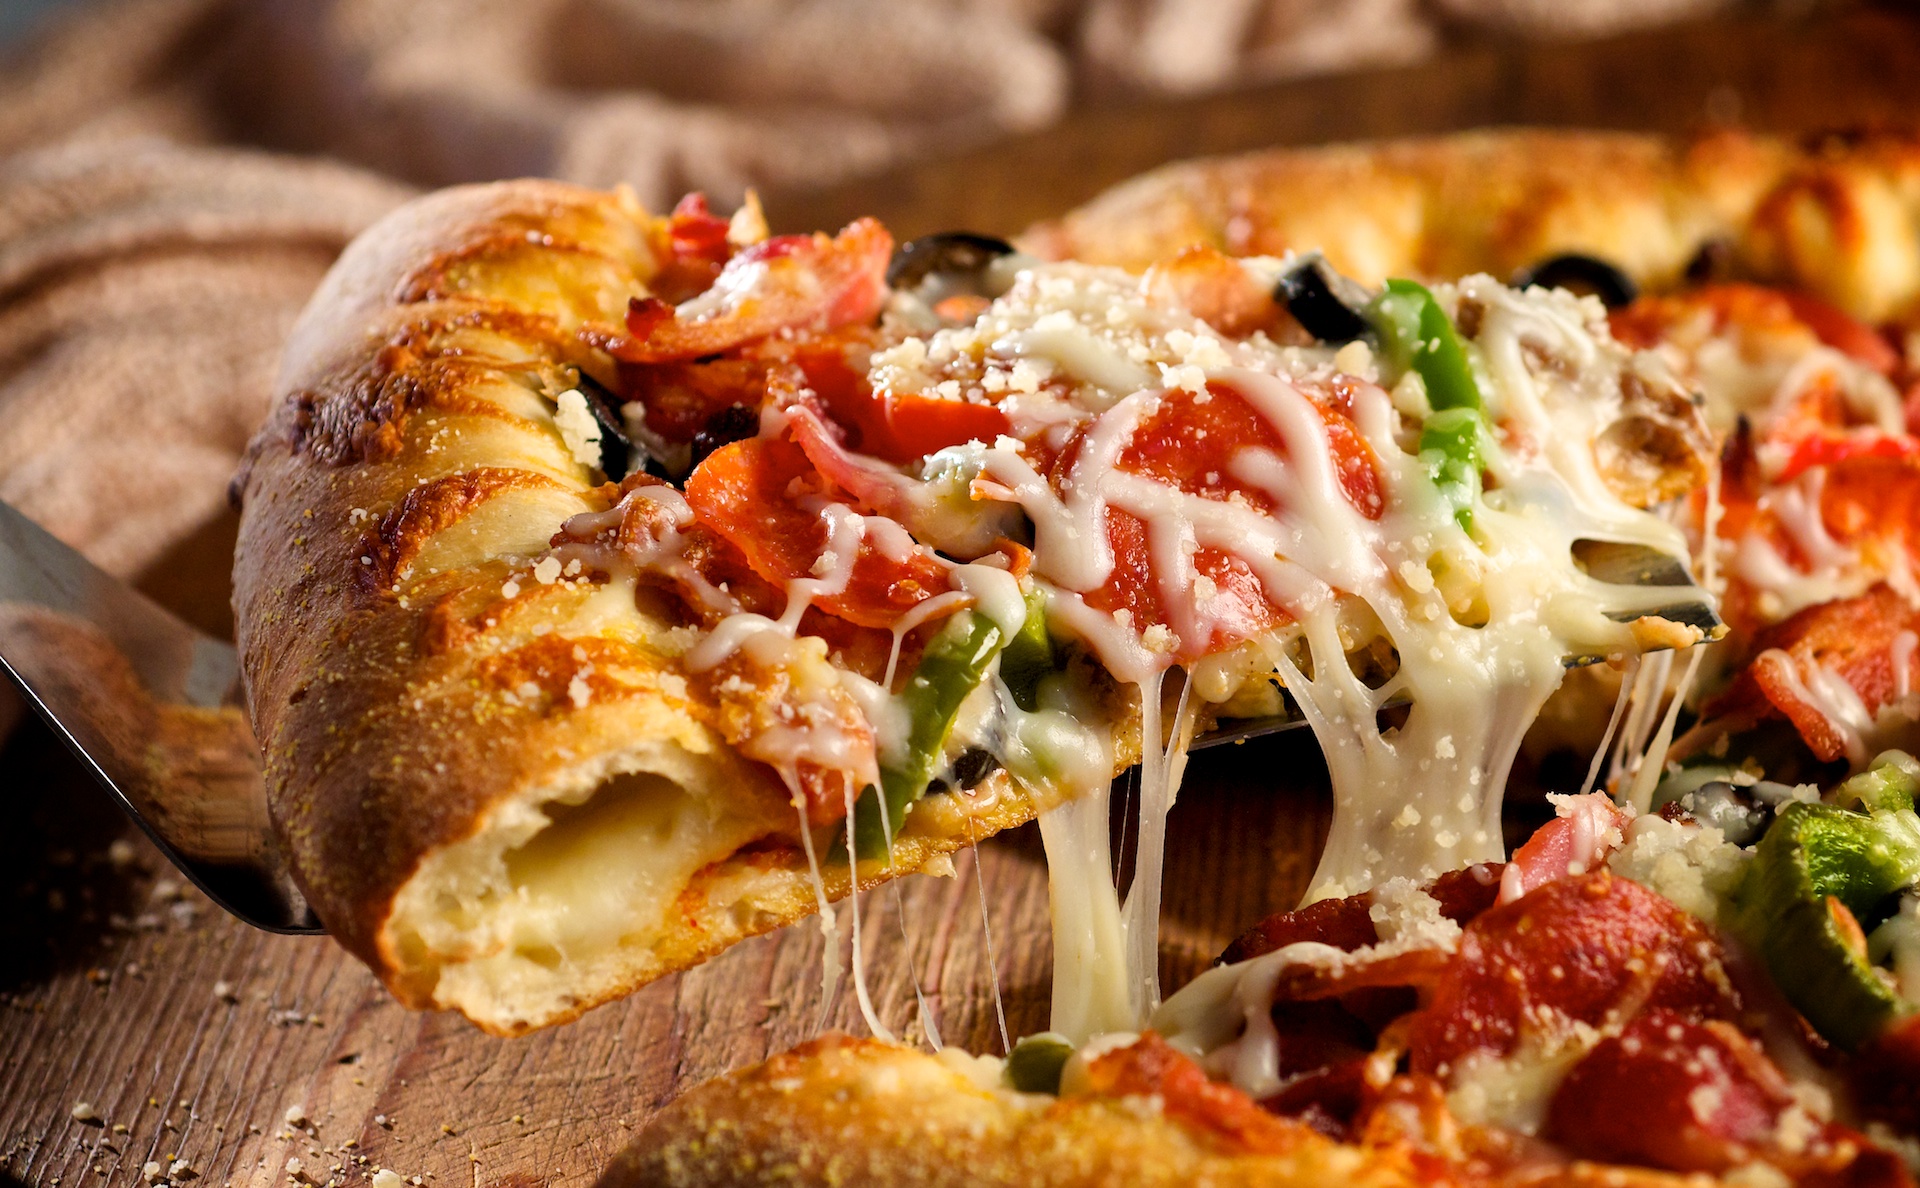 This is a hearty stuffed-crust pizza layered with four types of meat, black olives, and peppers all smothered in a gooey melted Mozzarella cheese. Need we say more?